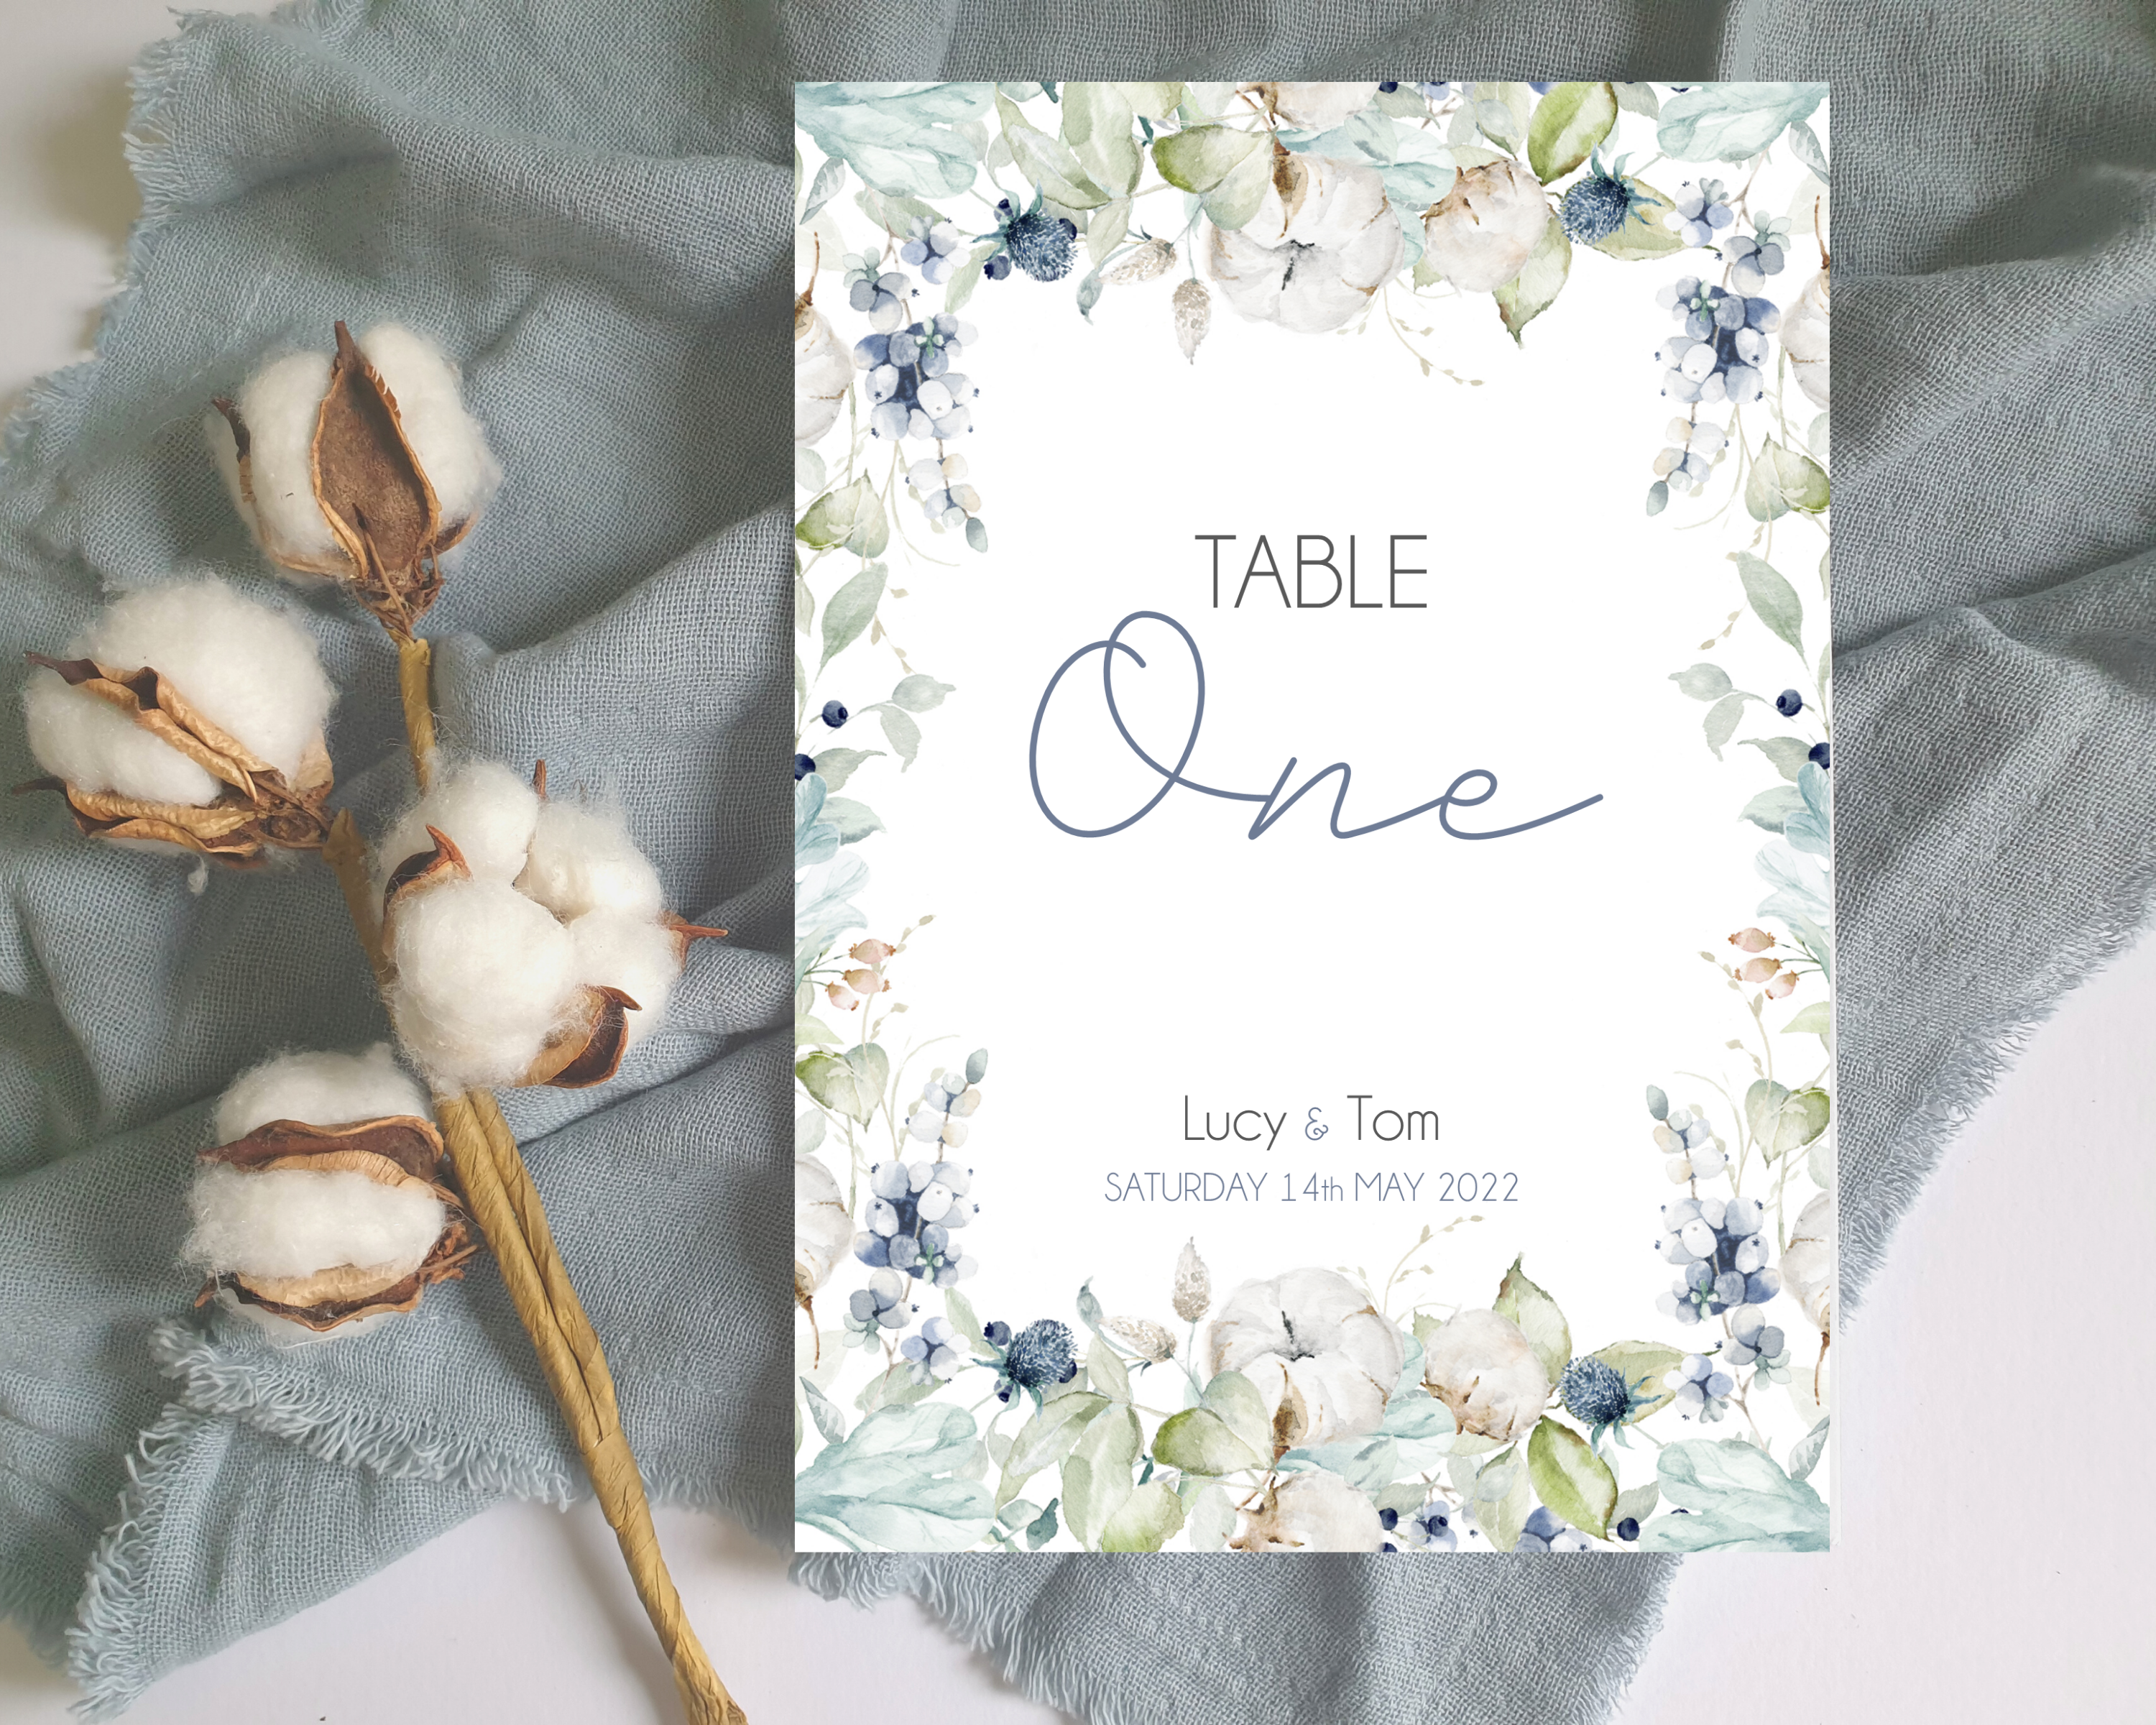 A Poppleberry dusty blue & cotton flowers wedding table number card, for 'Table One' of Lucy & Tom's wedding, in A5 size.